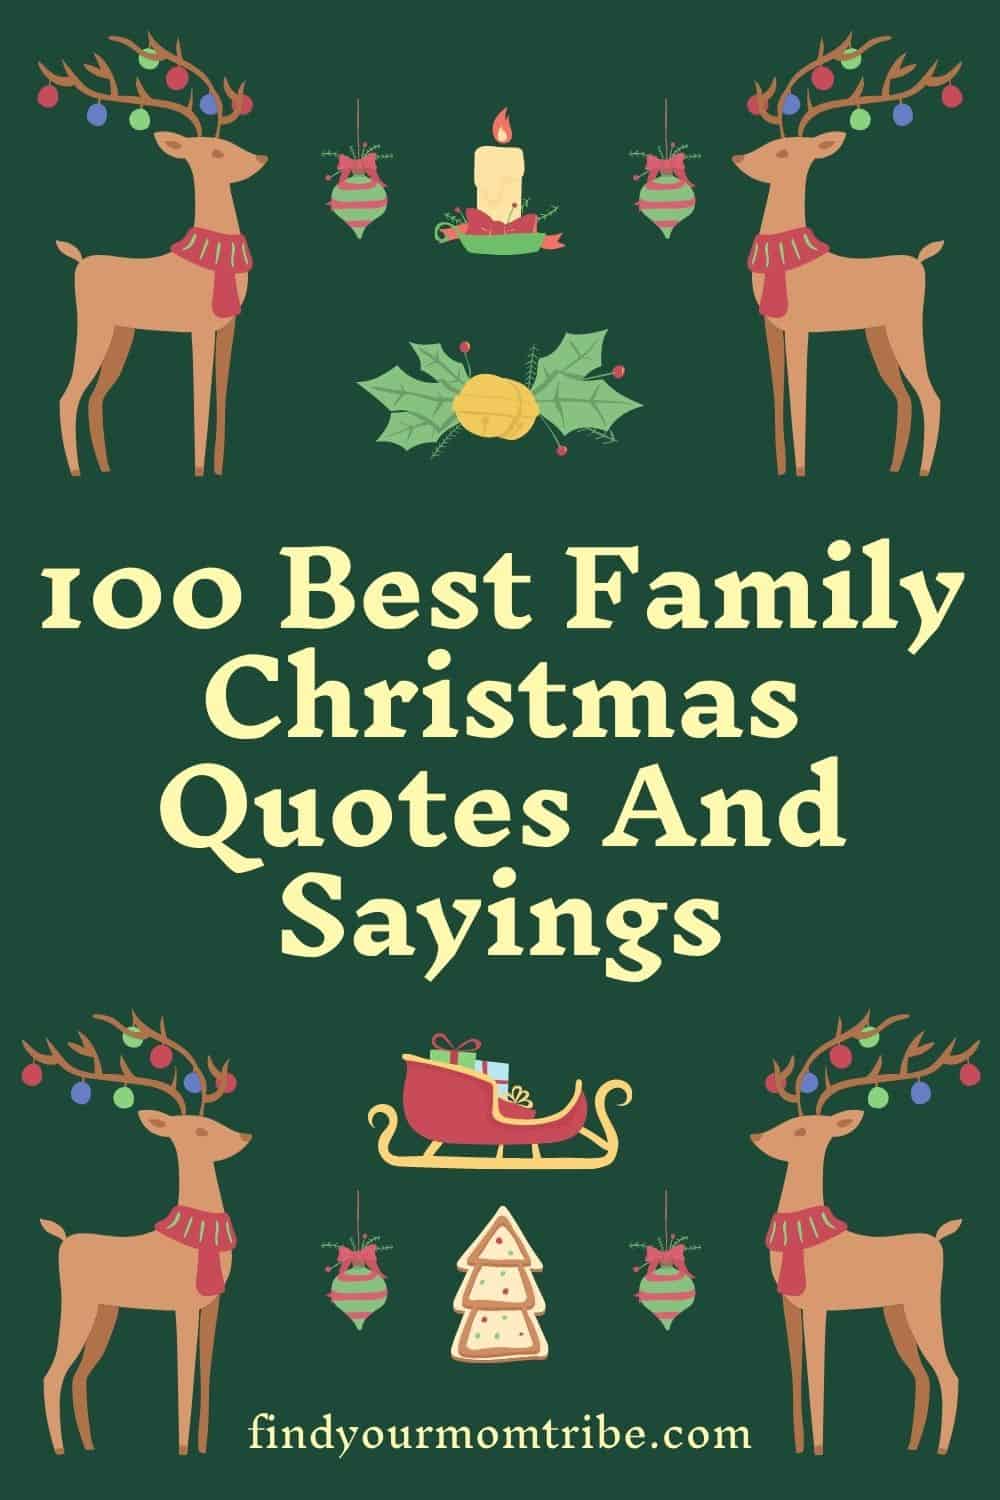 100 Best Family Christmas Quotes And Sayings